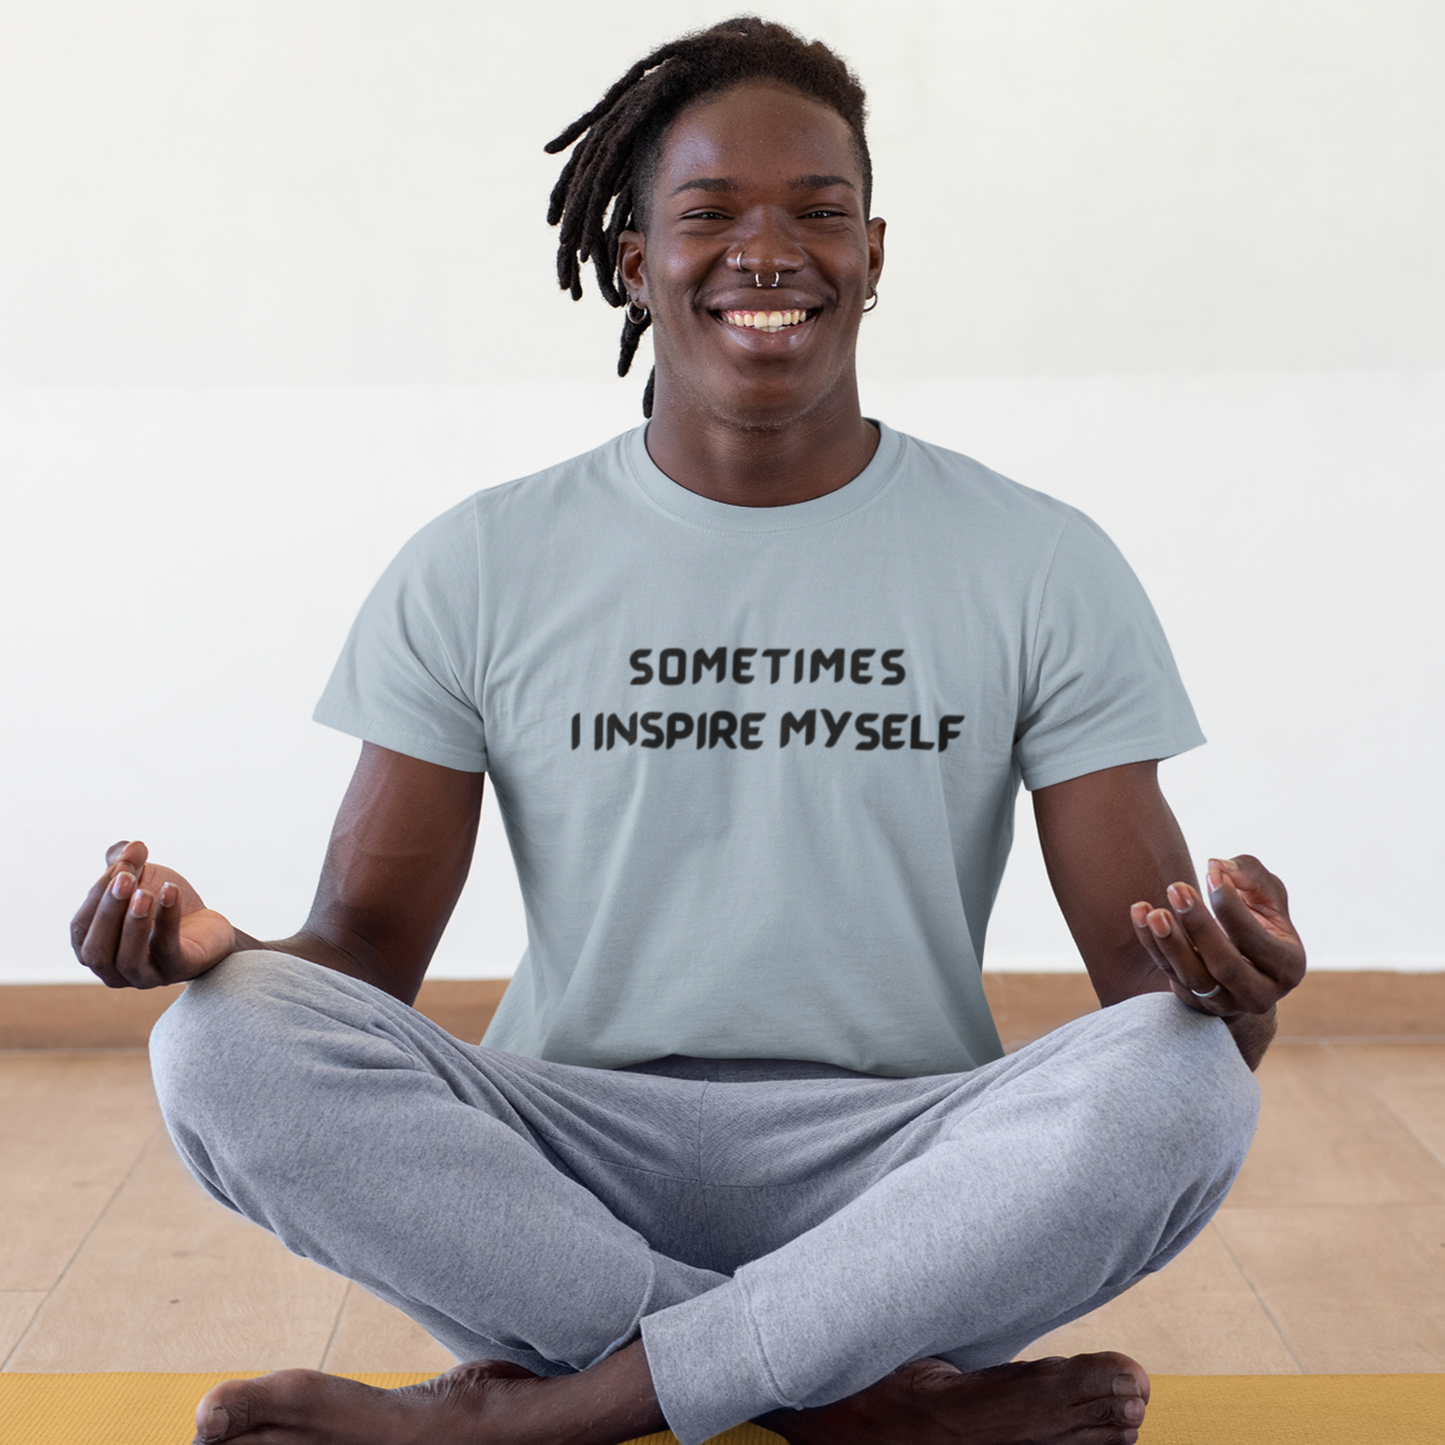 Sometimes I inspire myself unisex t shirt gift, t shirt gift with inspirational words, t shirt gift for friends